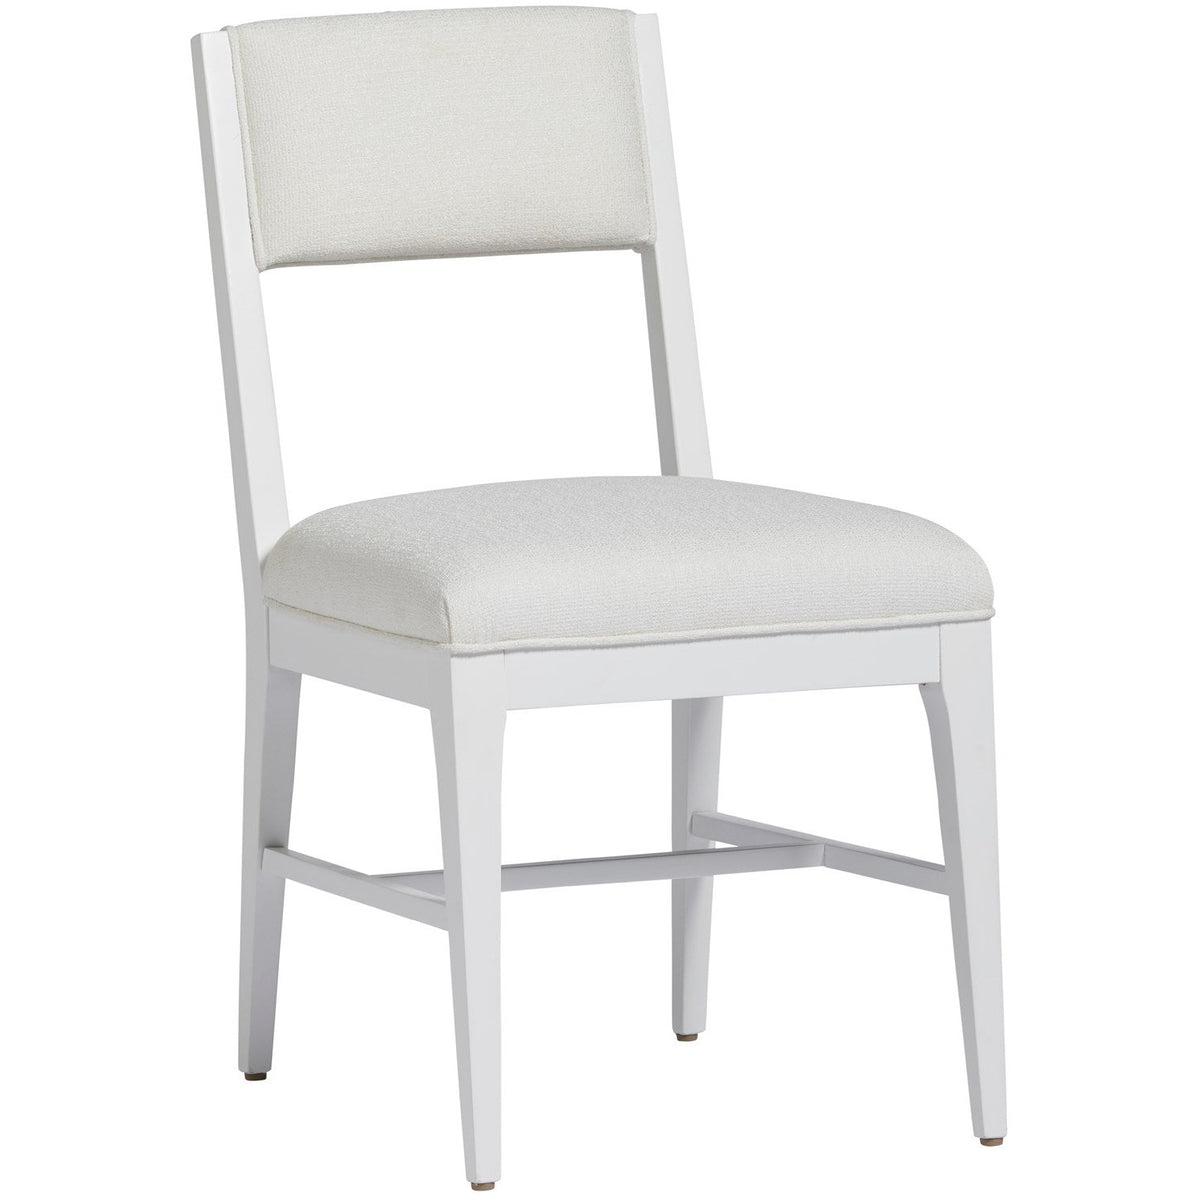 Presley Dining Chair - Be Bold Furniture